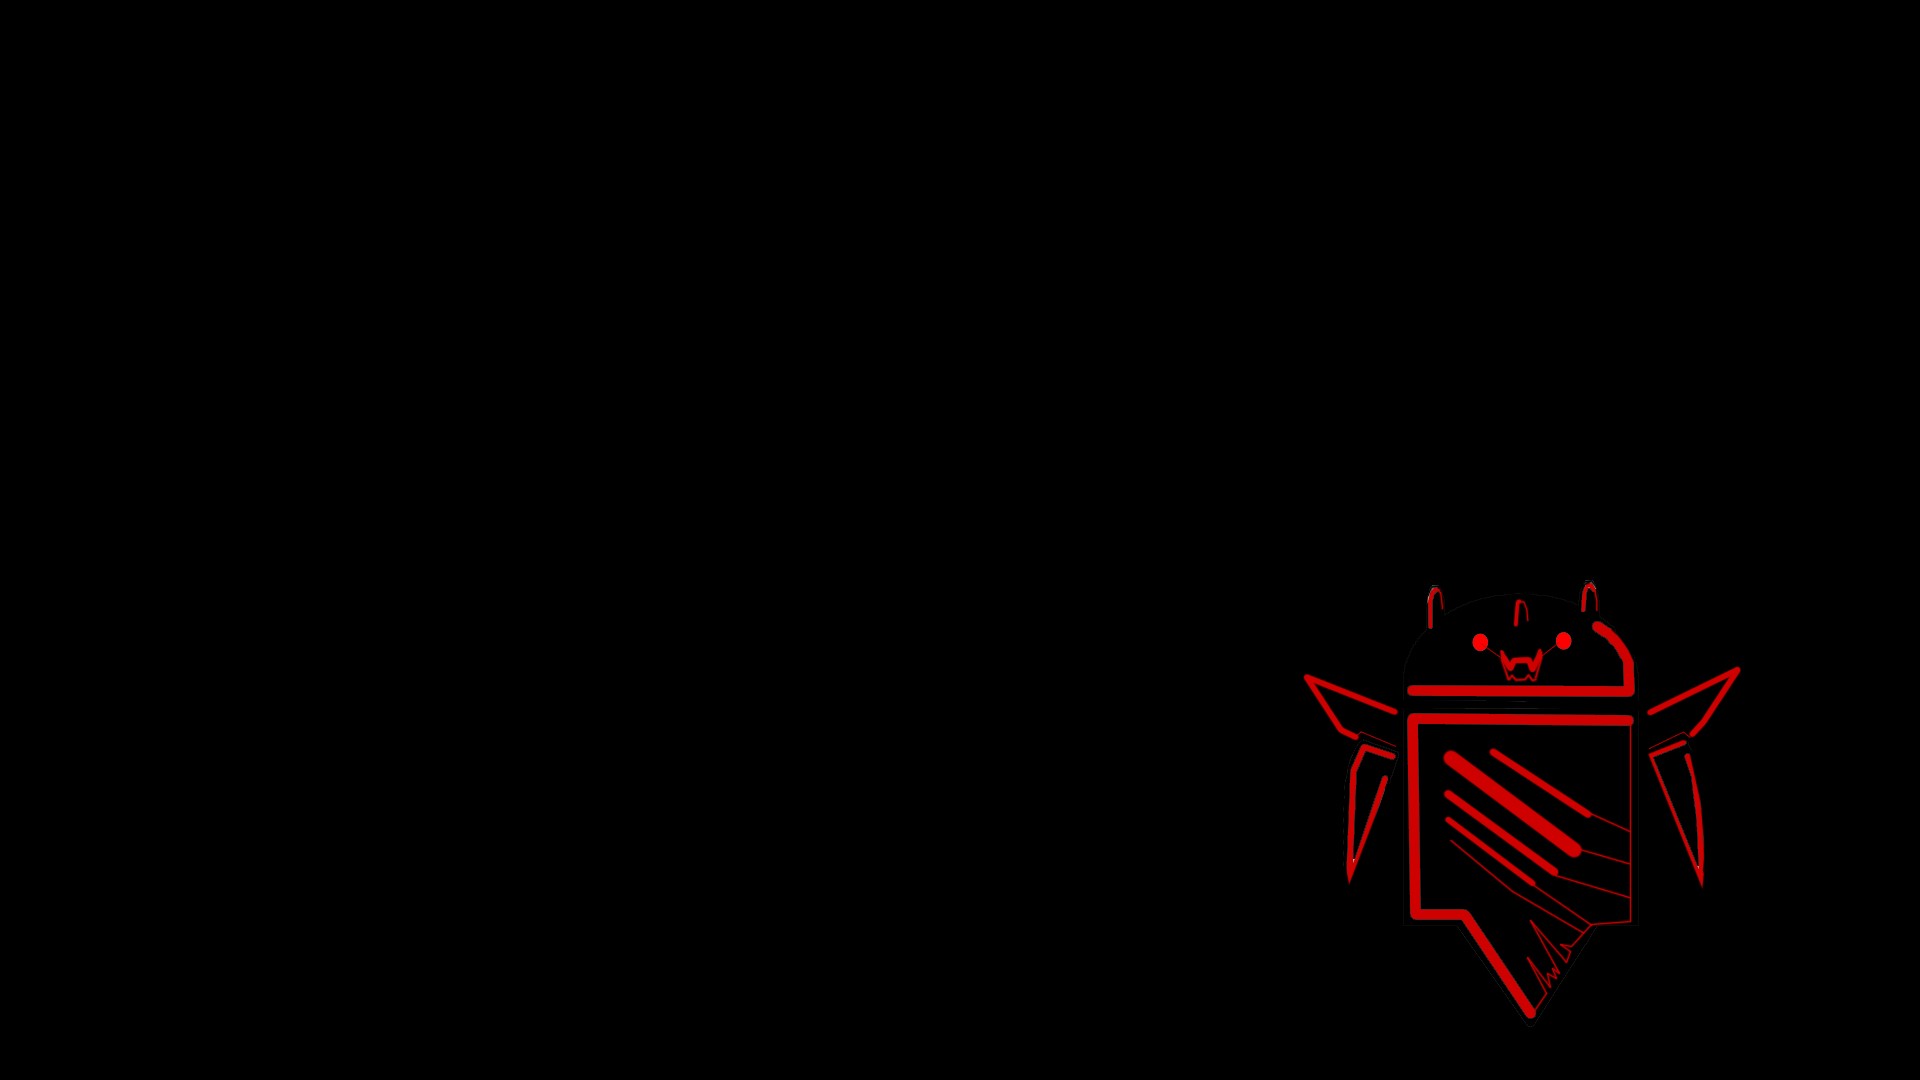 shadow fiend, Microsoft Windows, Android (operating system), Dota 2, Androidify Wallpaper